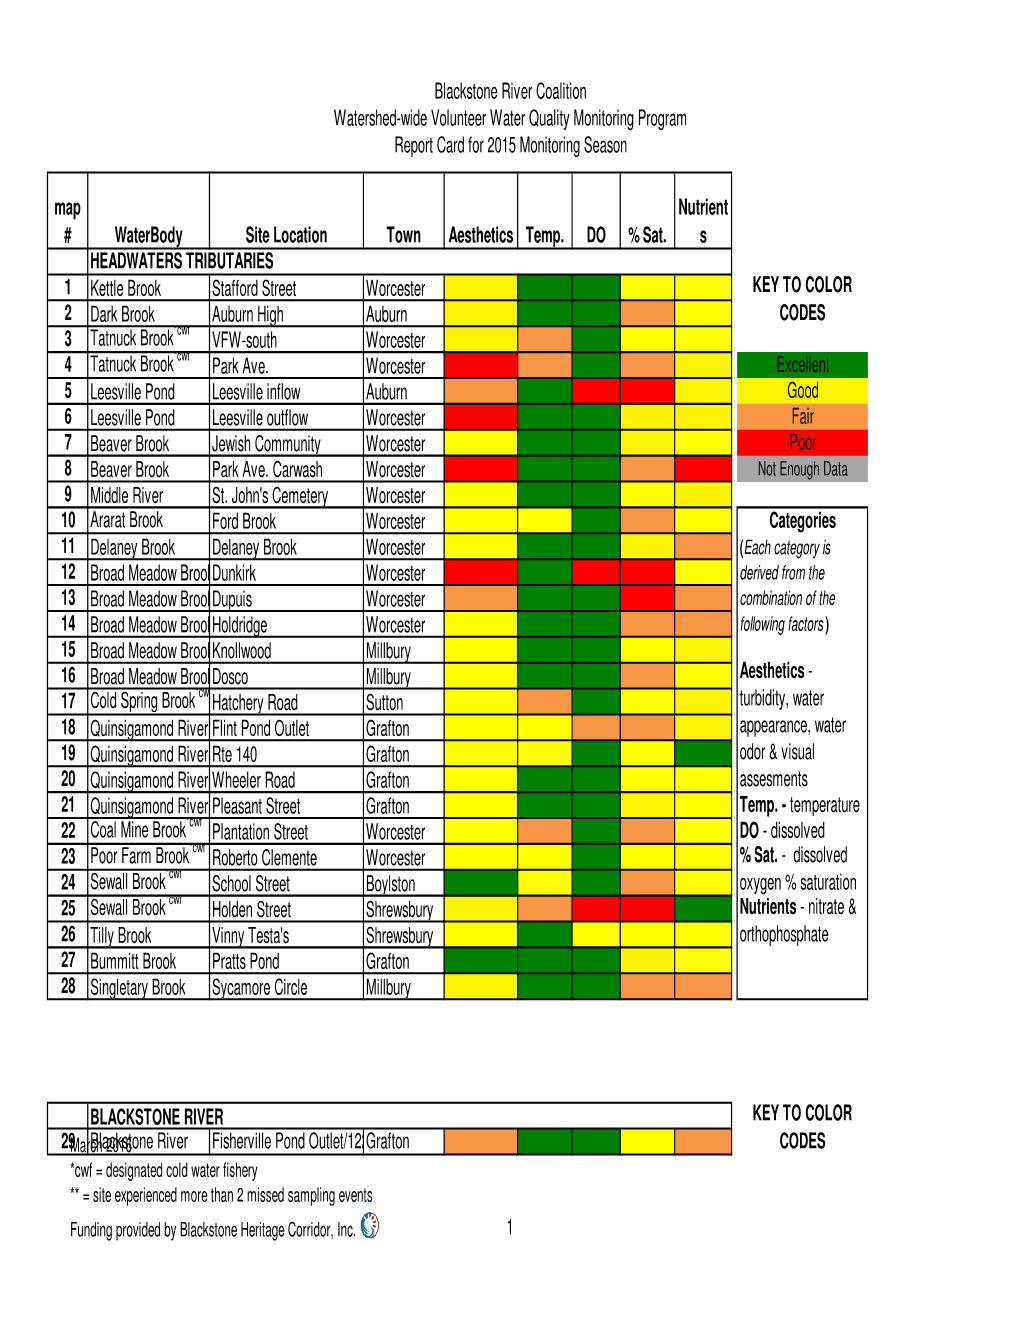 Report Card for 2015 Monitoring Season Map Nutrient # Waterbody Site Location Town Aesthetics Temp